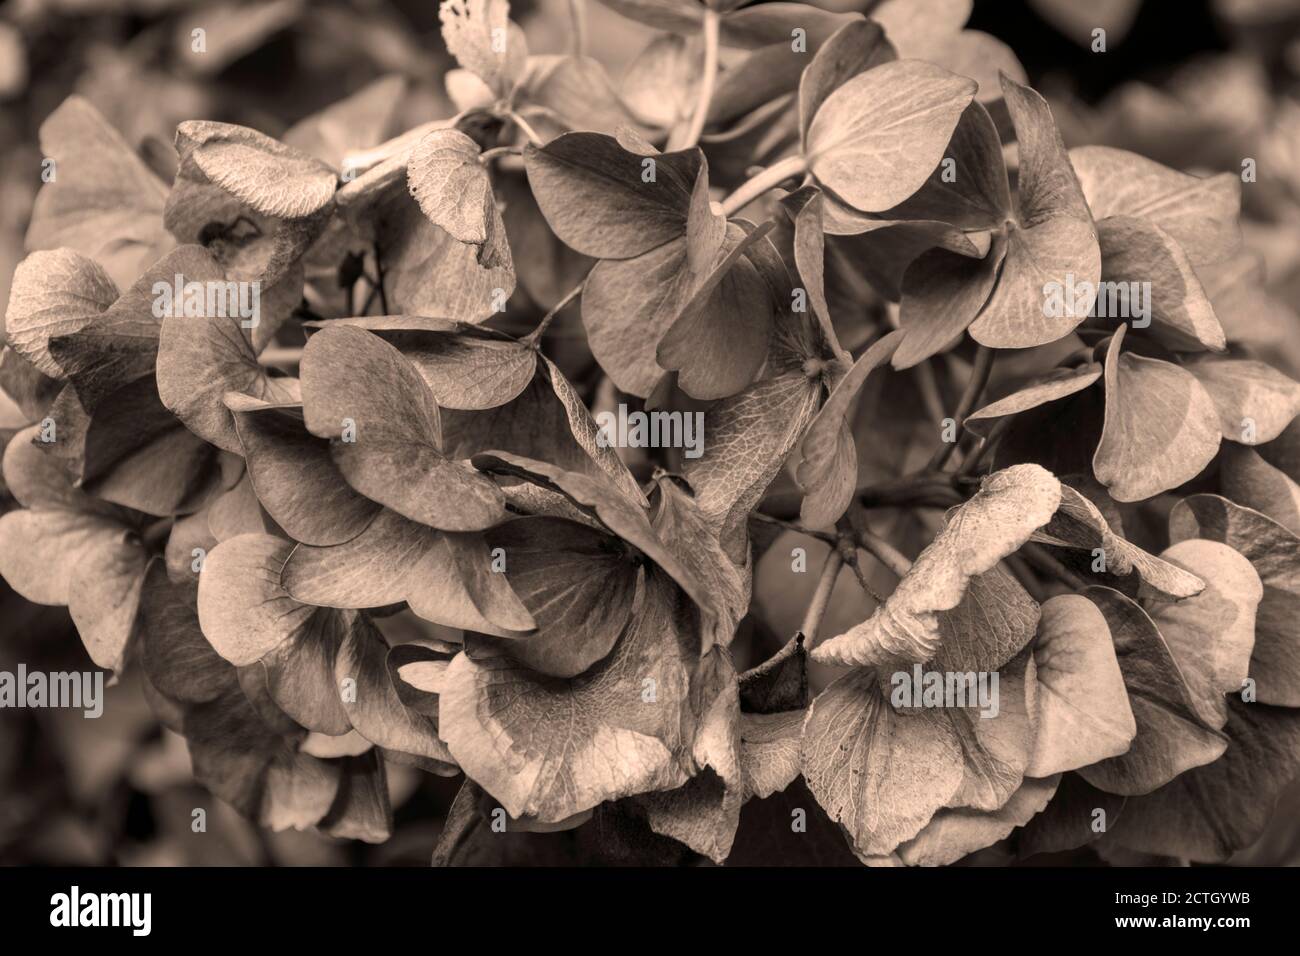 A close up detail of a Hydrangea flower as it matures through the summer season Stock Photo